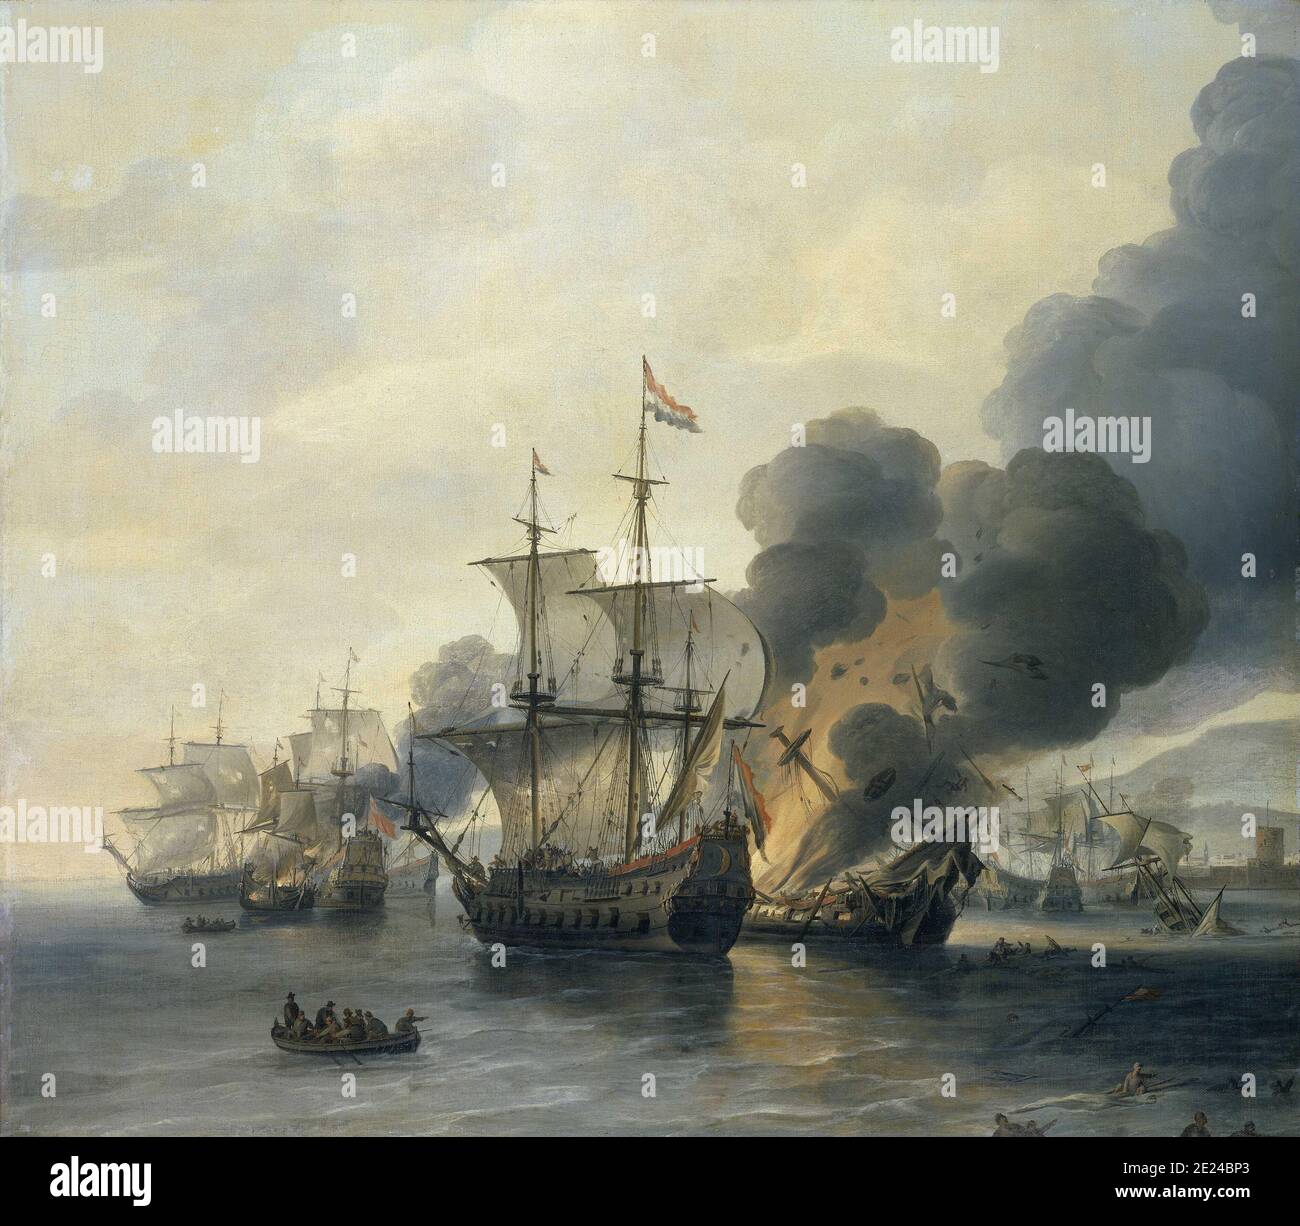 Maritime: 'The Battle of Leghorn, 4 March 1653'. Oil on canvas painting by Willem Hermansz van Diest (c. 1600-1678), mid-17th century. The naval Battle of Leghorn (the Dutch call the encounter by the Italian name Livorno) took place on 14 March (4 March Old Style) 1653, during the First Anglo-Dutch War, near Leghorn (Livorno), Italy. It was a victory of a Dutch fleet under Commodore Johan van Galen over an English squadron under Captain Henry Appleton. Afterward an English fleet under Captain Richard Badiley, which Appleton had been trying to reach, came up but was outnumbered and fled. Stock Photo